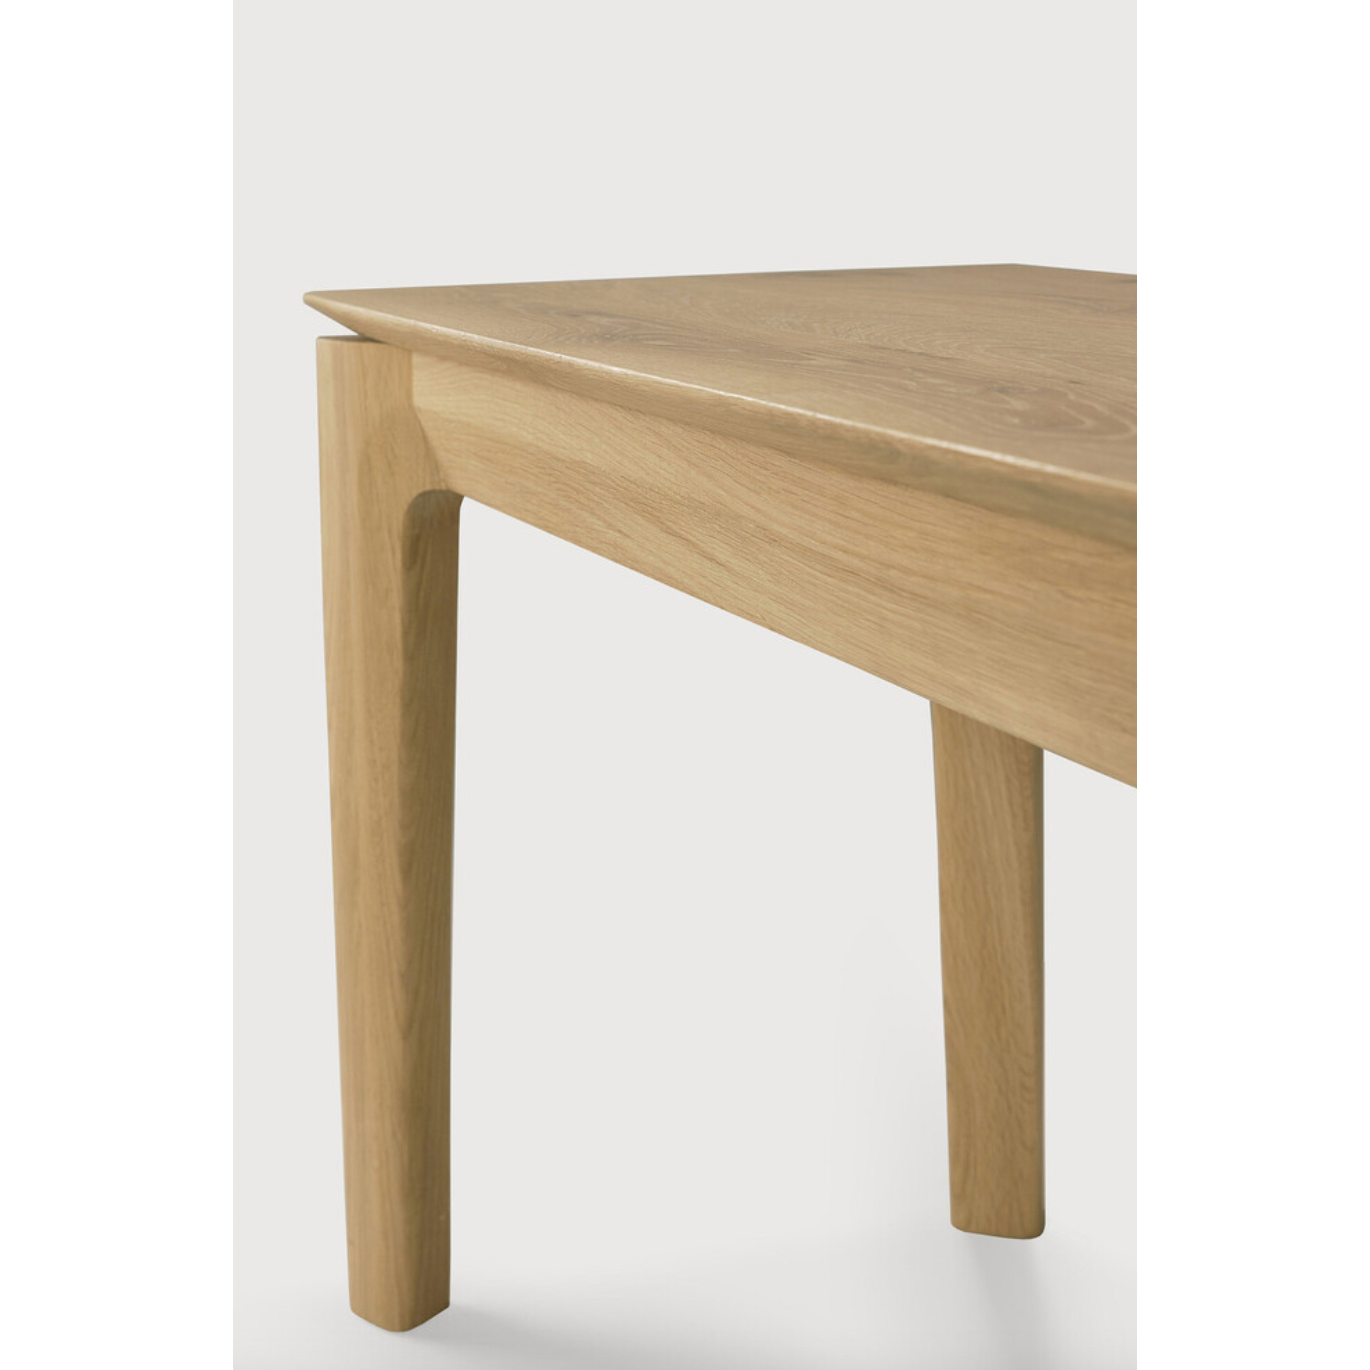 This Oak Bok Bench features an airy shape with rock-solid construction,  making this piece a timeless and remarkable design to enjoy for years to come. Pair with a dining table or stand-alone against a wall, hallway, or end of the bed!  Material: Oak Finish: Oiled